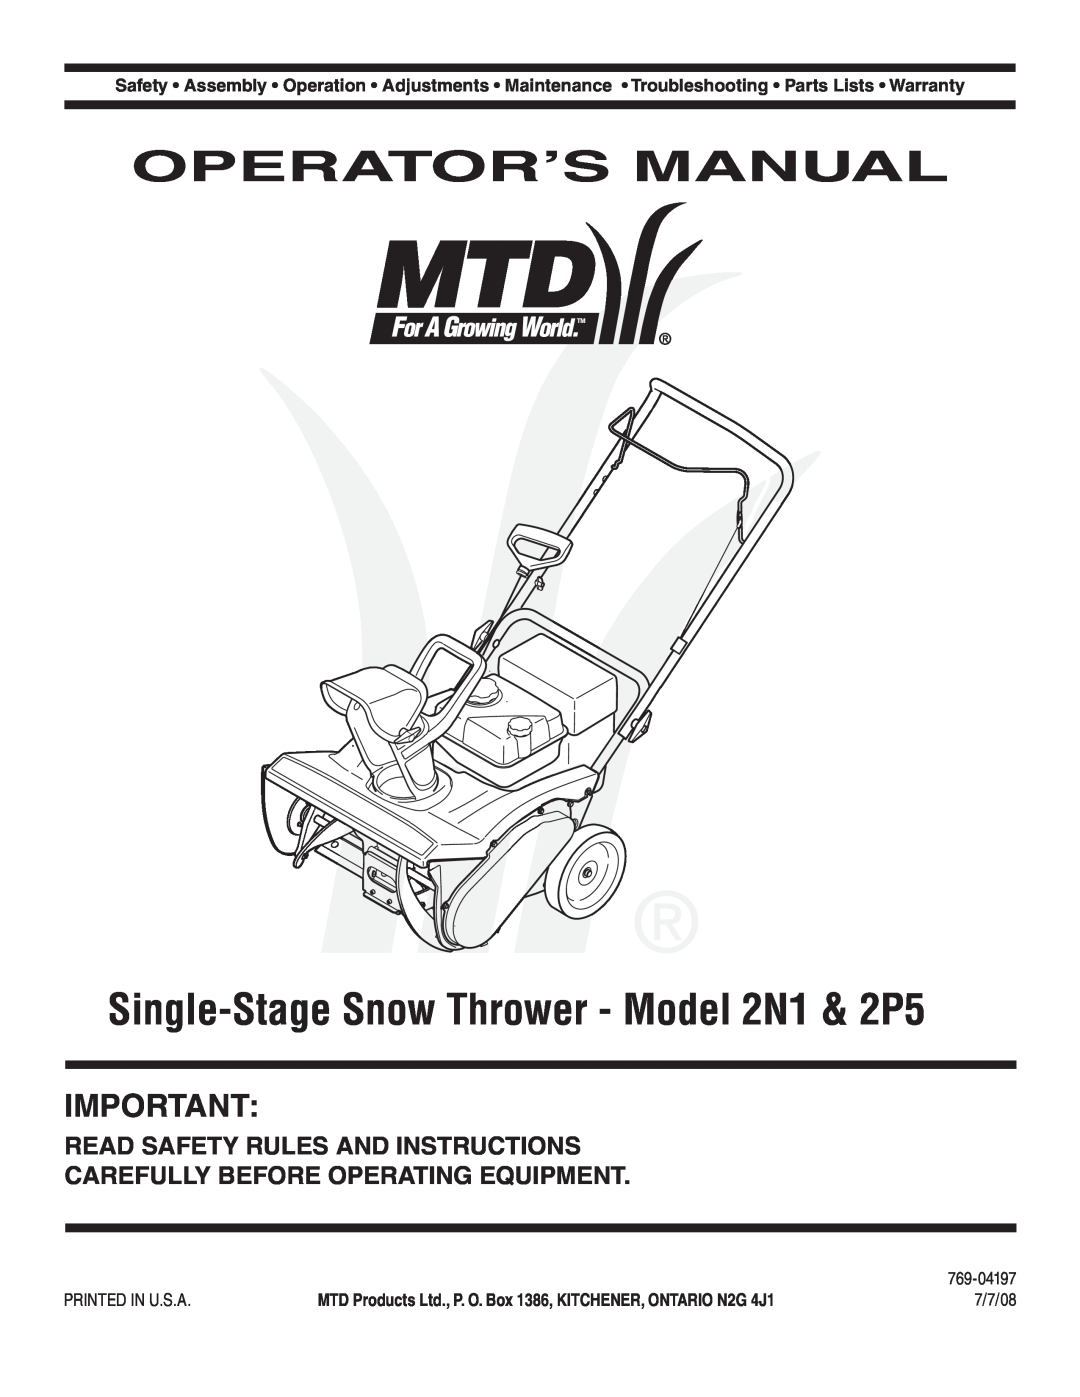 MTD warranty Operator’S Manual, Single-StageSnow Thrower - Model 2N1 & 2P5, Read Safety Rules And Instructions 